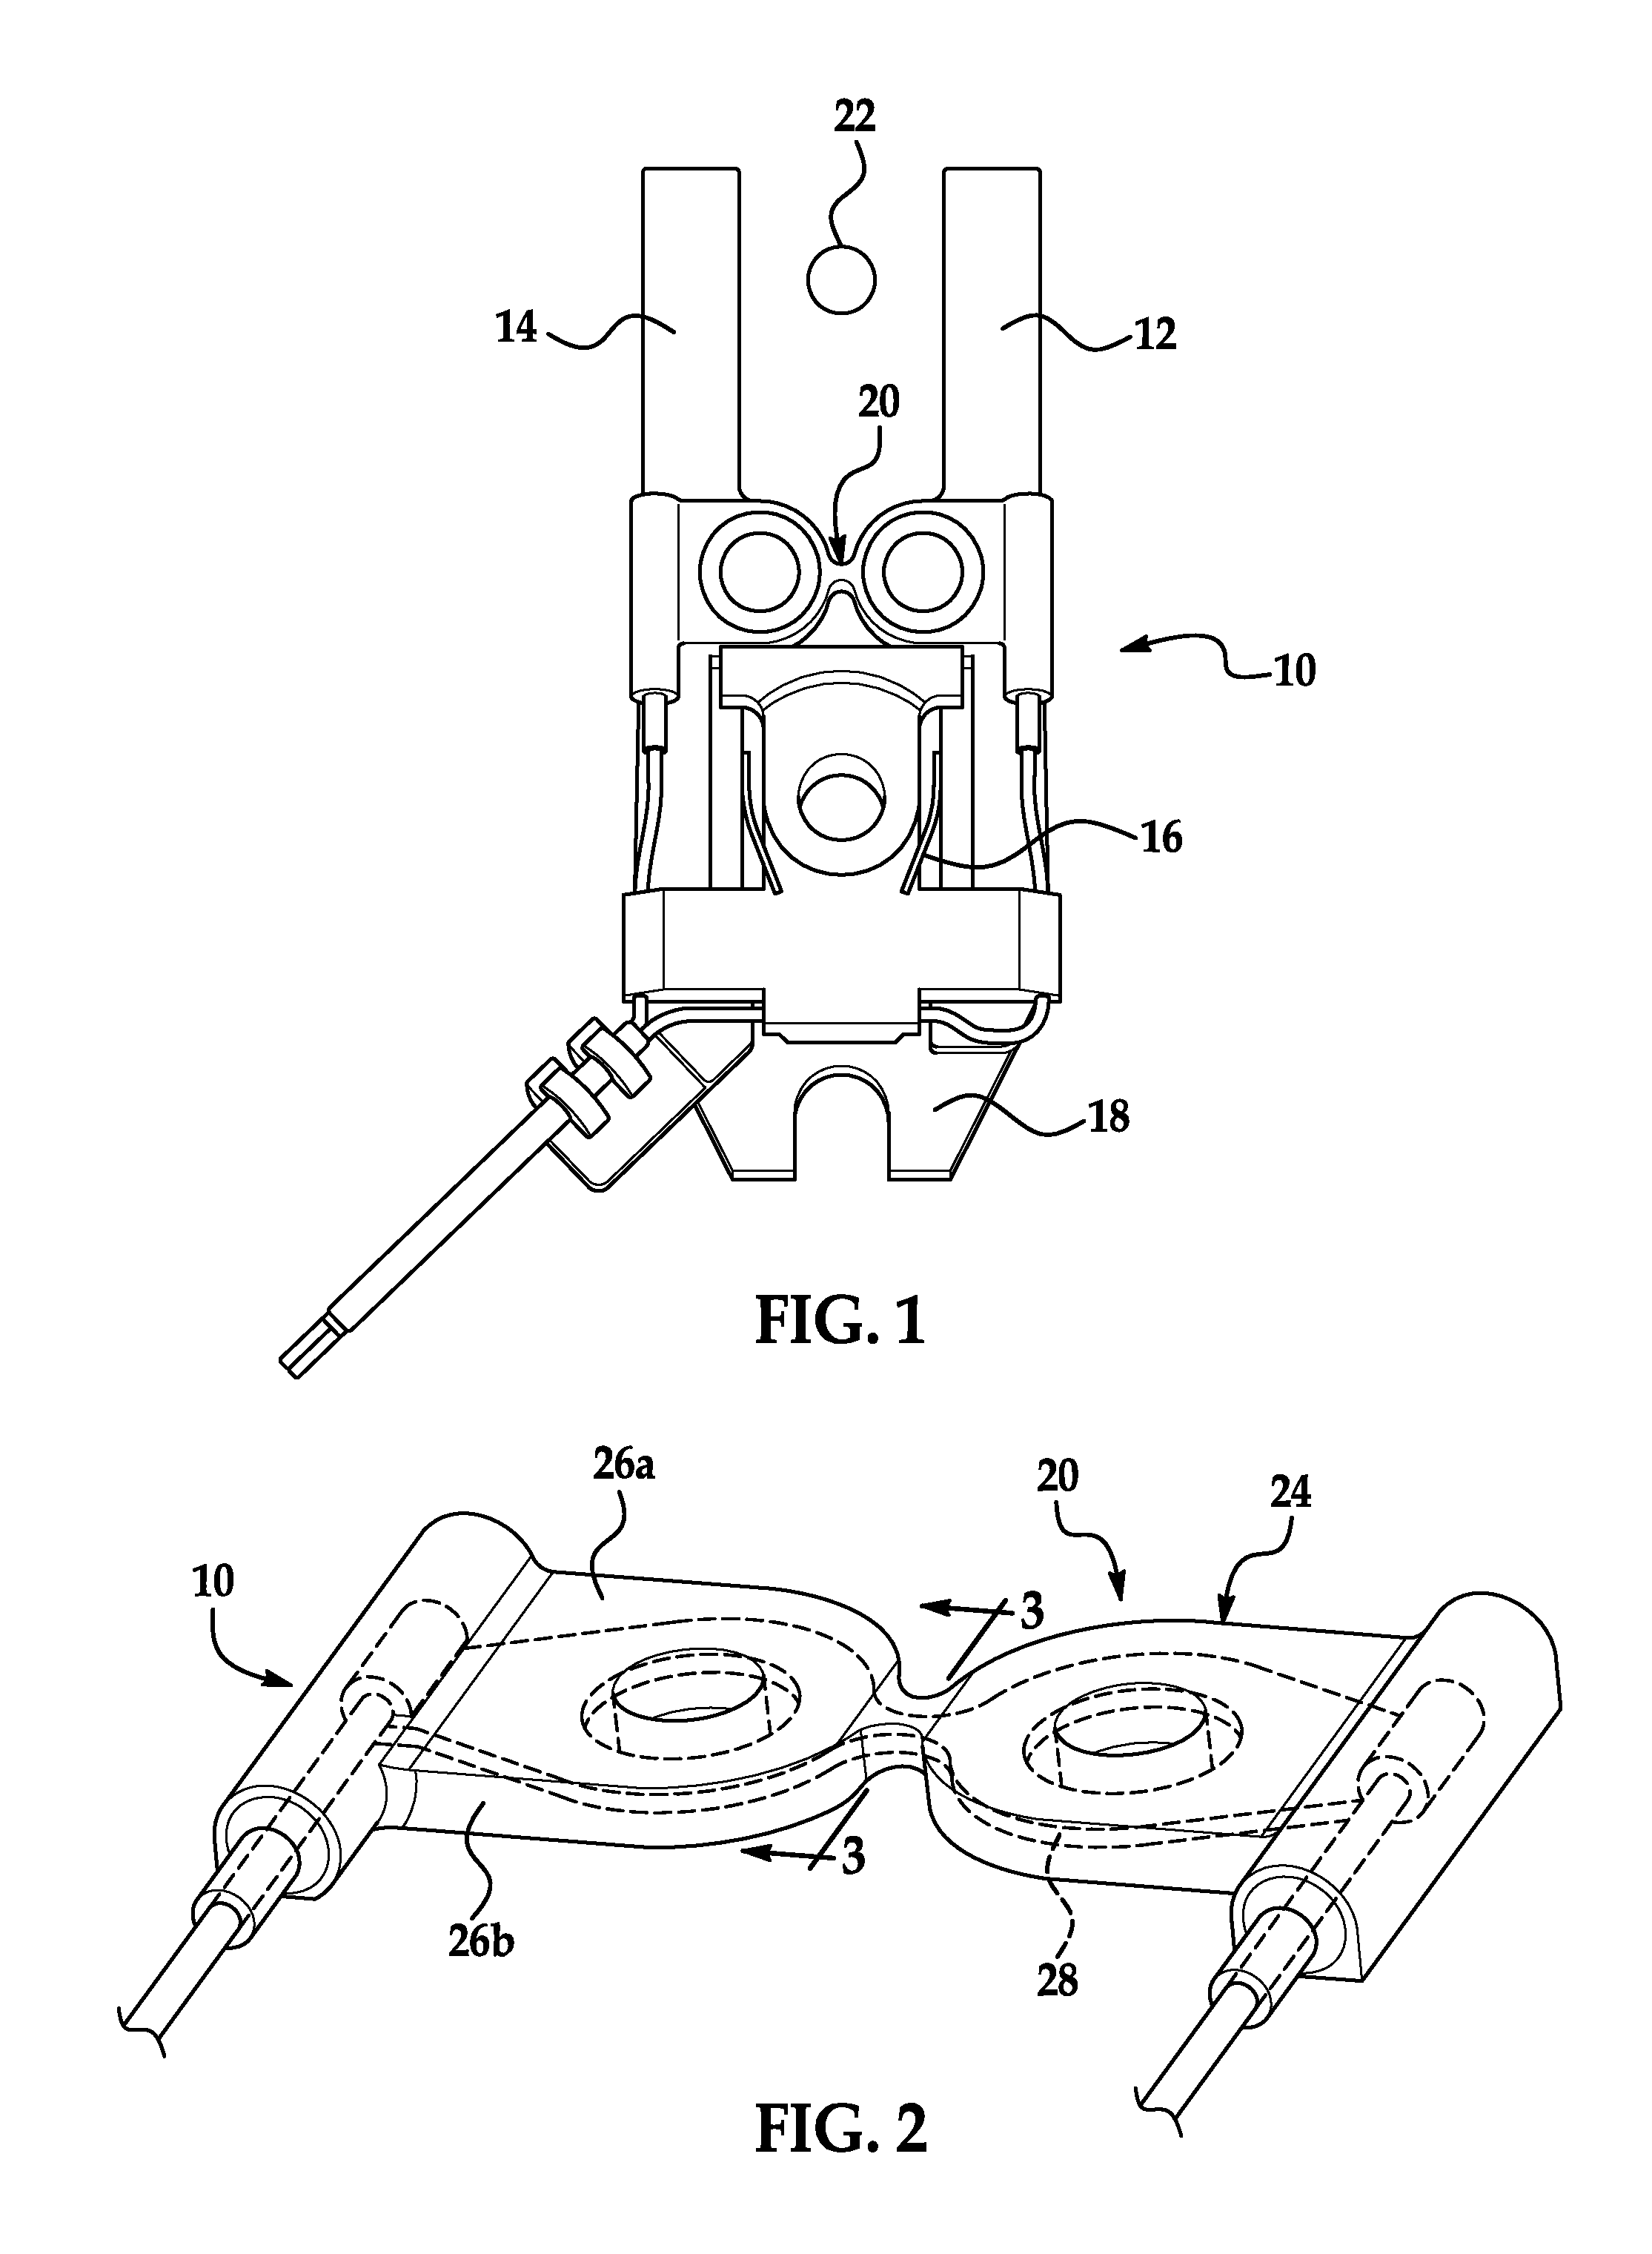 Electromechanical fuse for differential motion sensing